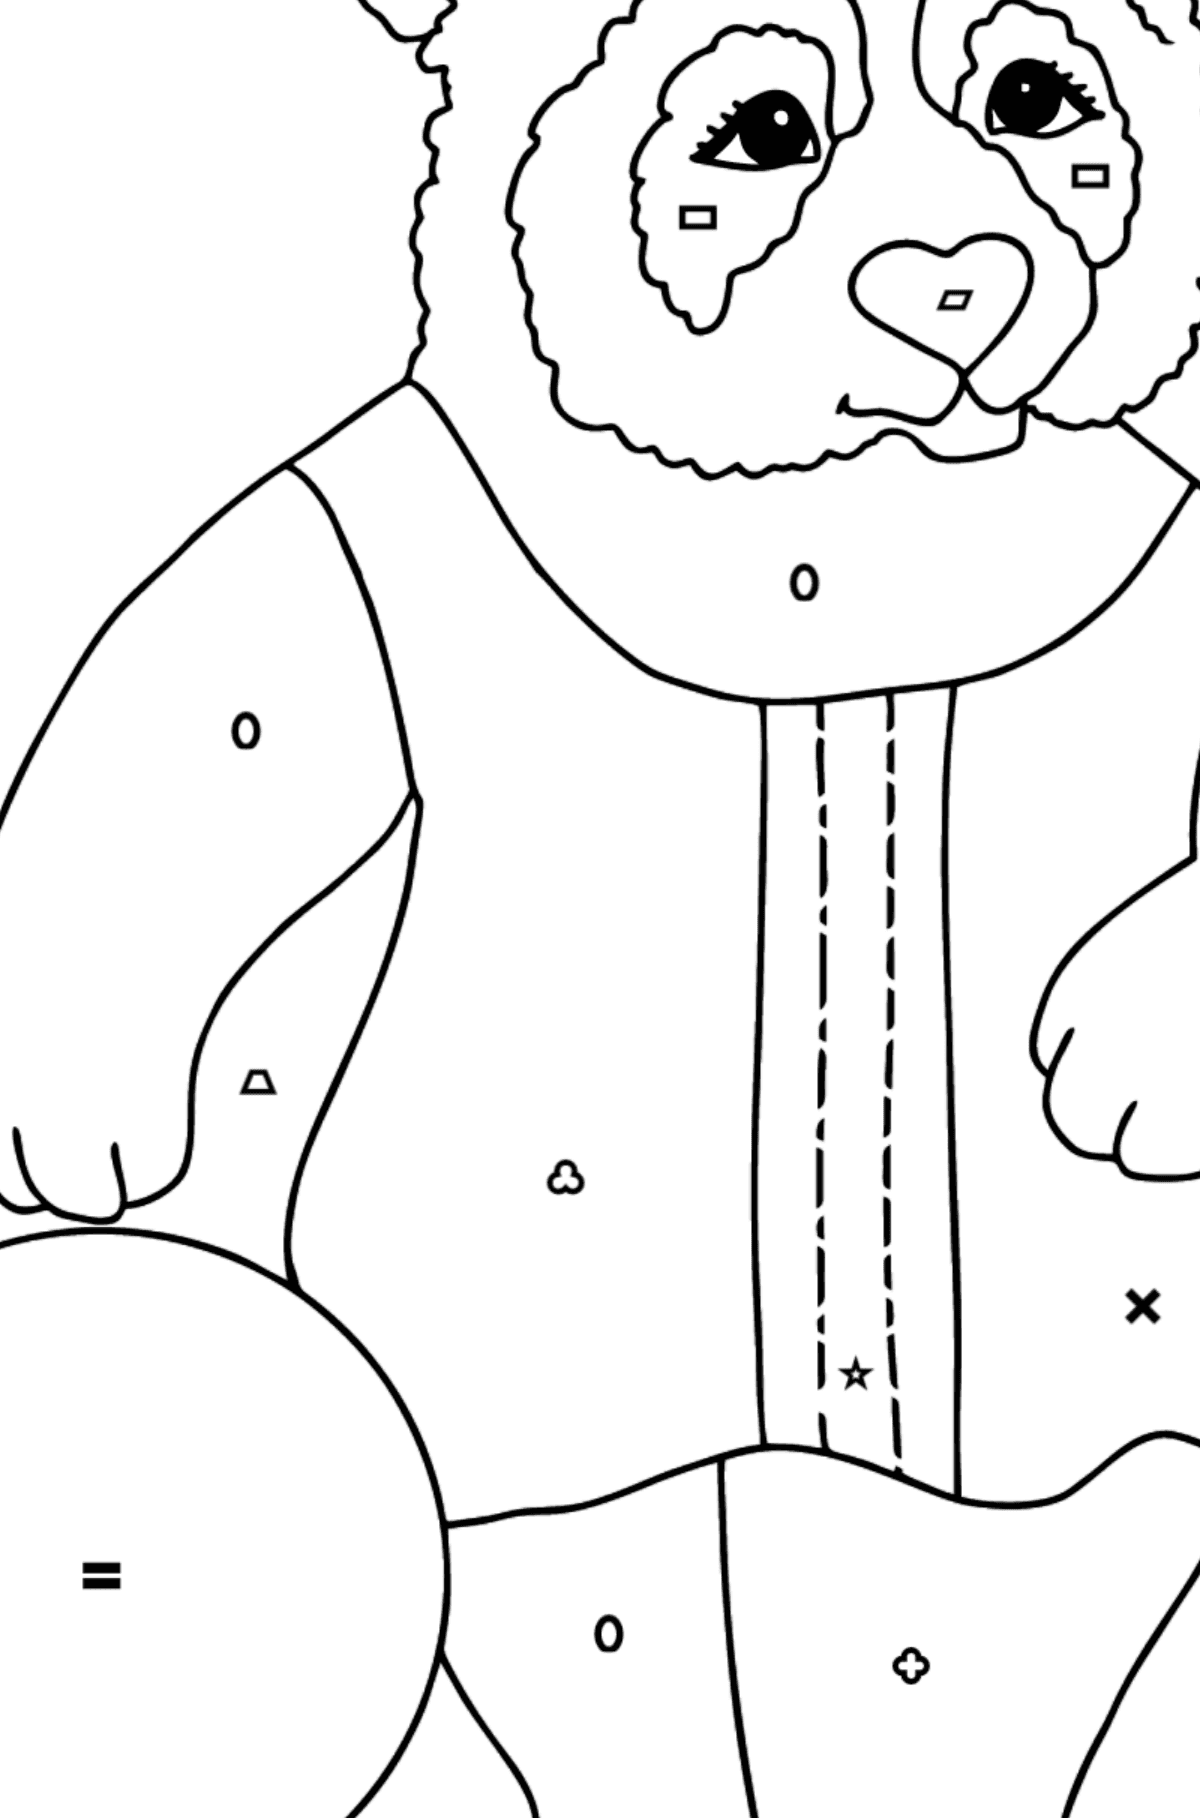 Panda For Babies coloring page - Coloring by Symbols and Geometric Shapes for Kids